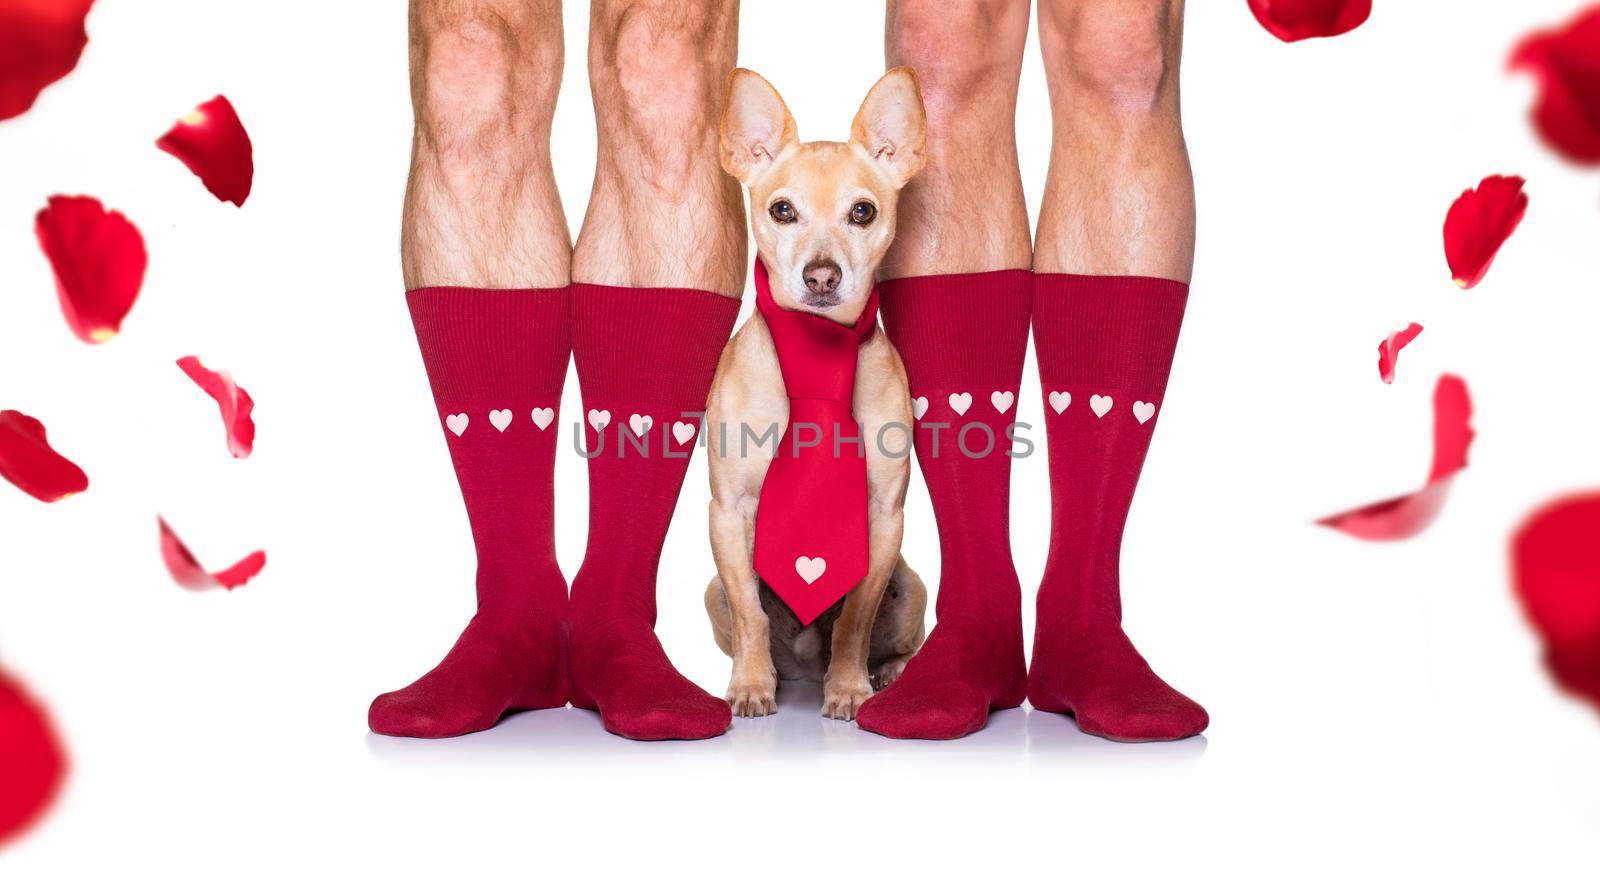 gay wedding couple with chihuahua dog wearing socks, getting maried with red roses all over isolated on white background